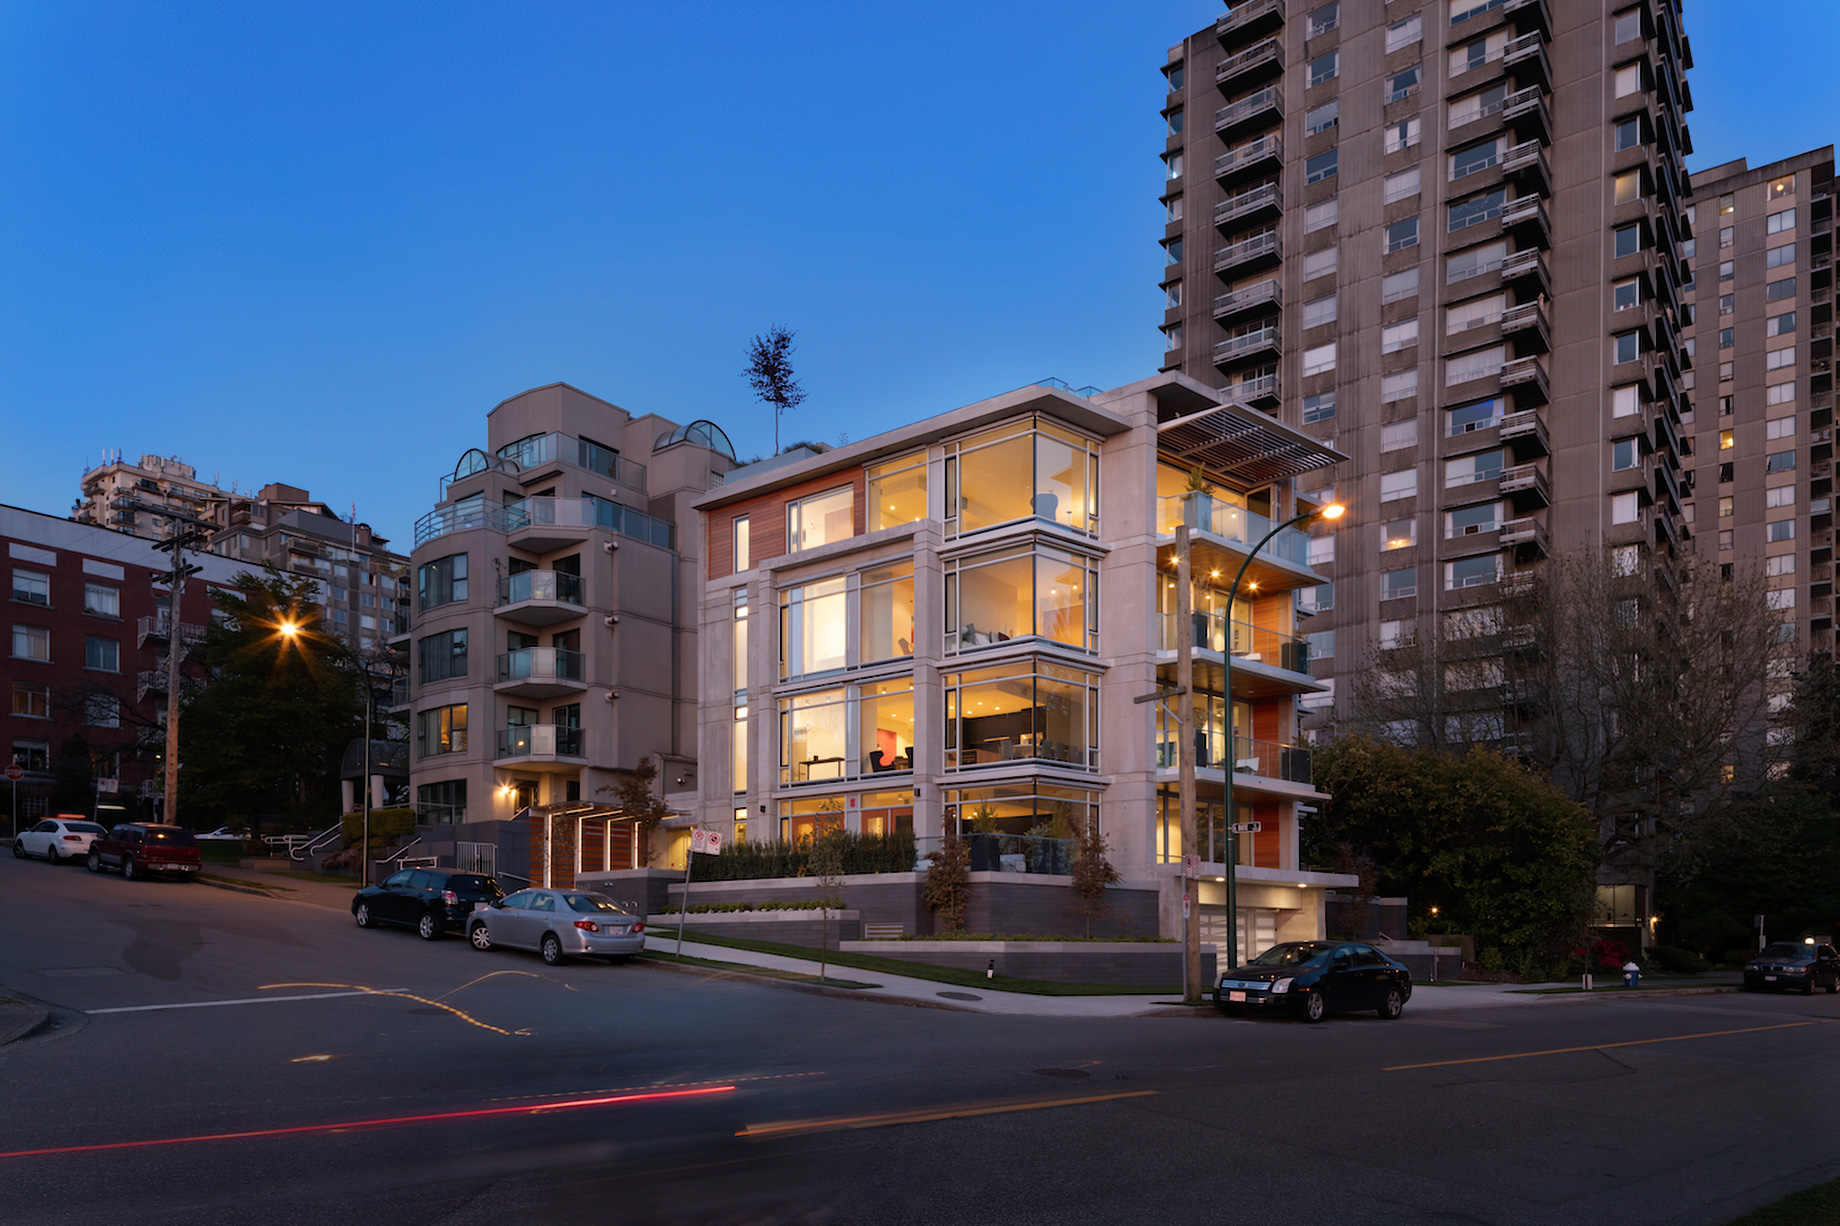 Eventide Ultra Luxury English Bay Homes - Bute St, Vancouver, BC, Canada